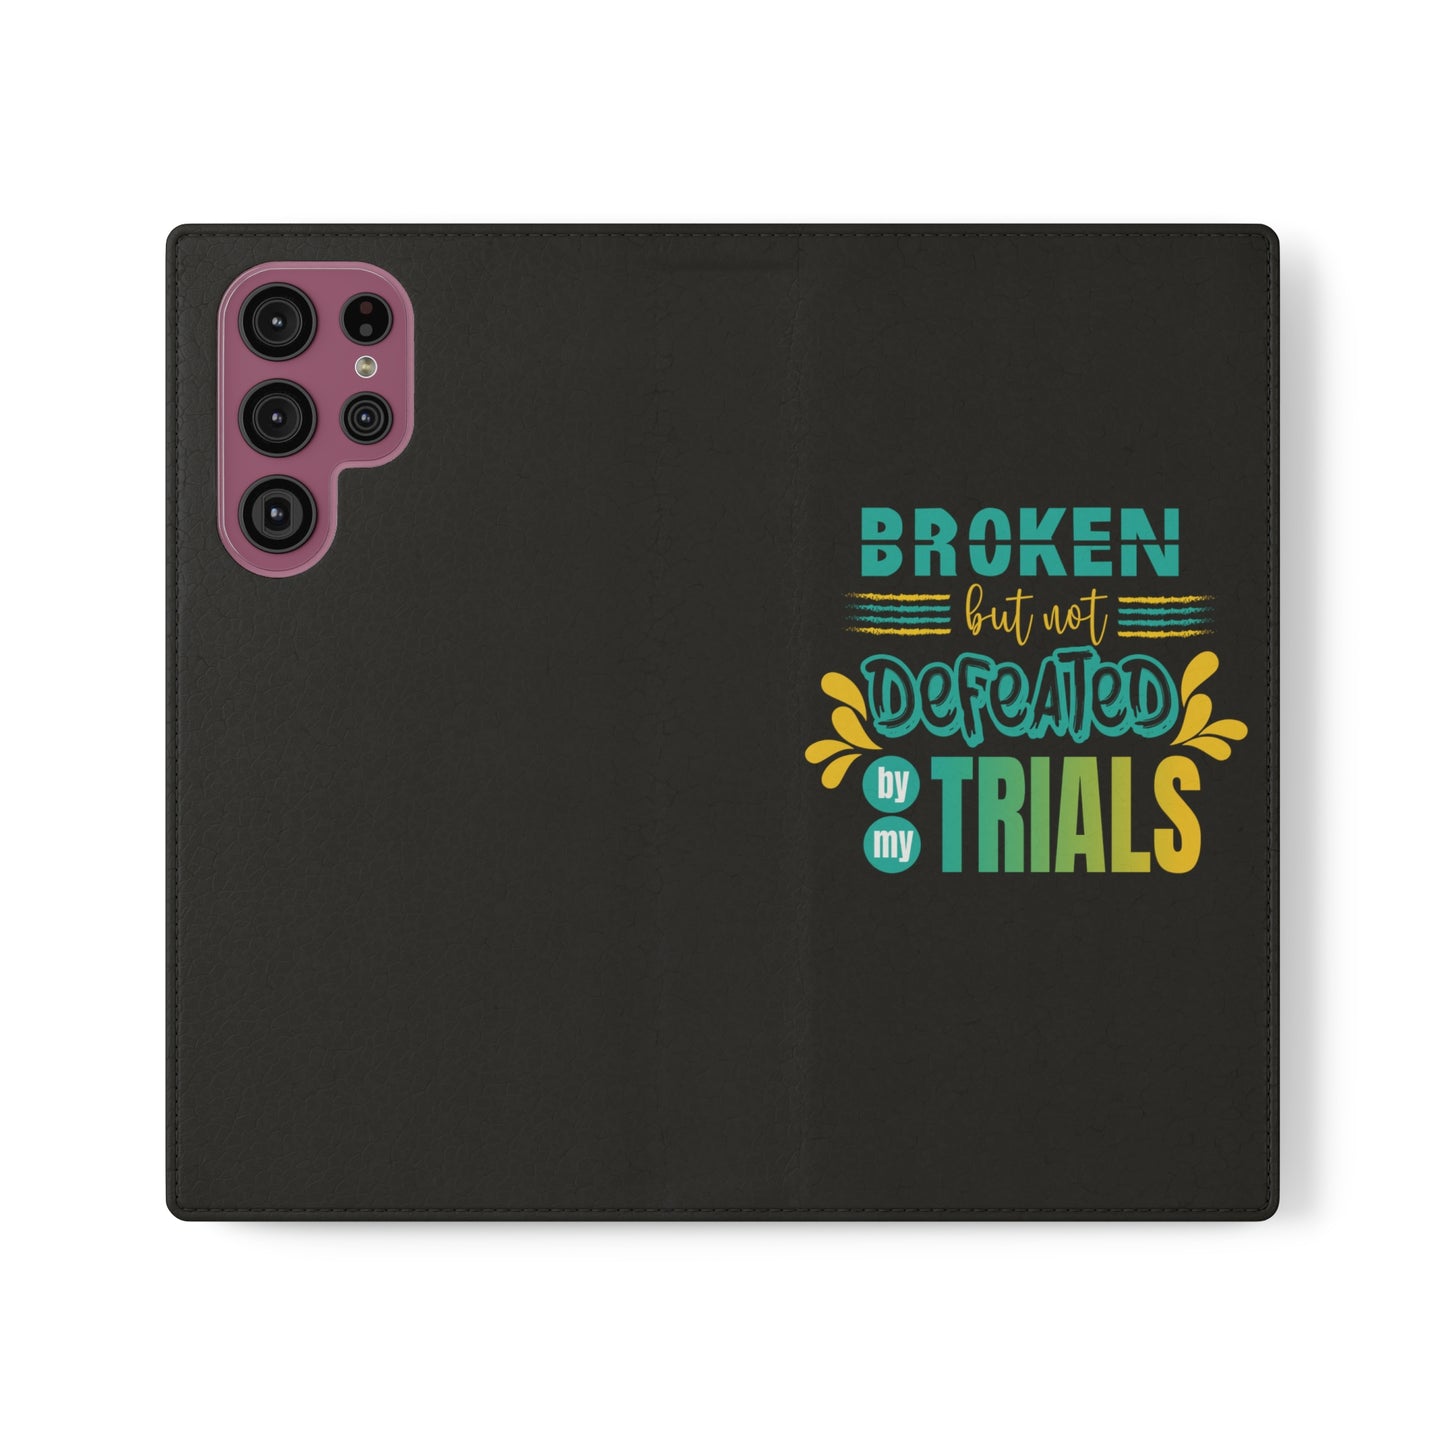 Broken But Not Defeated By My Trials Phone Flip Cases